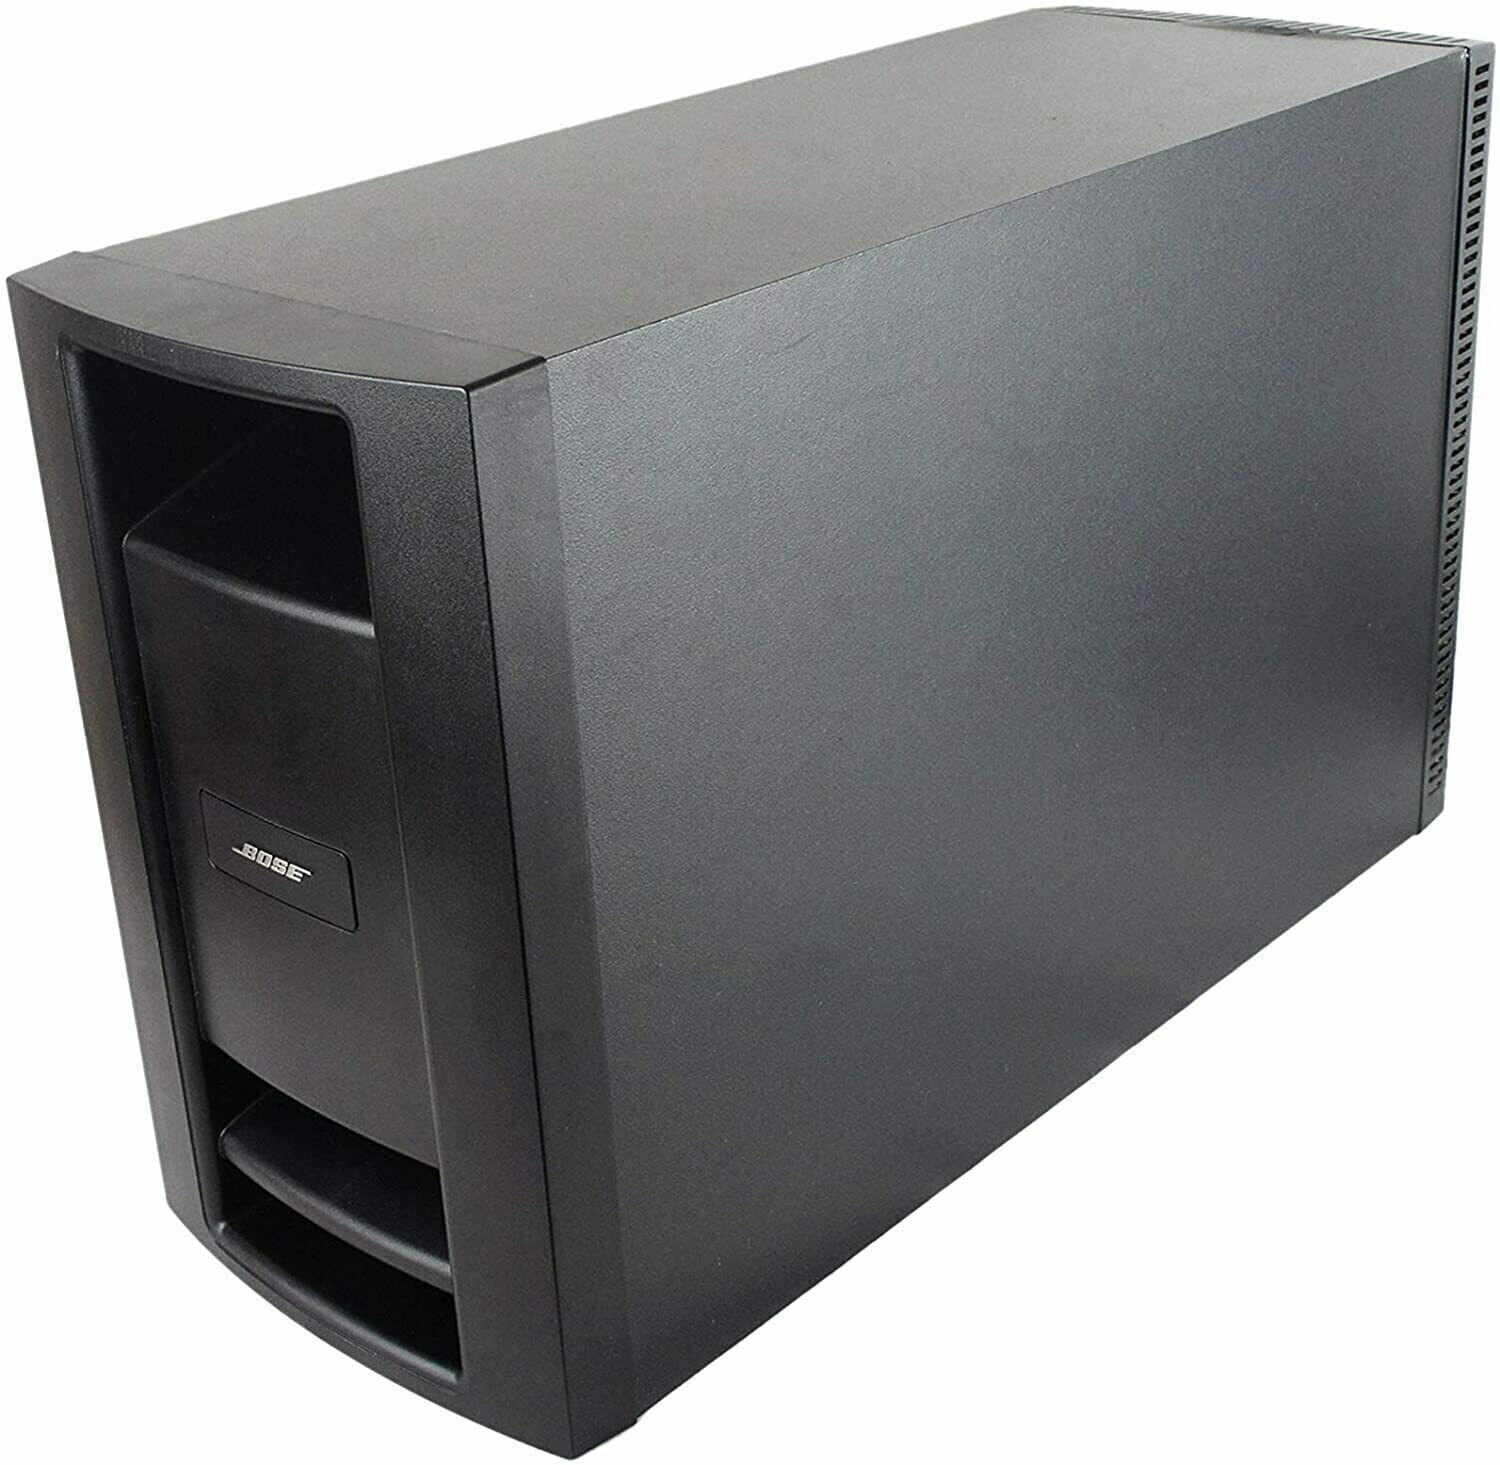 Replacement Bose Subwoofer for Bose Lifestyle PS48 Series III